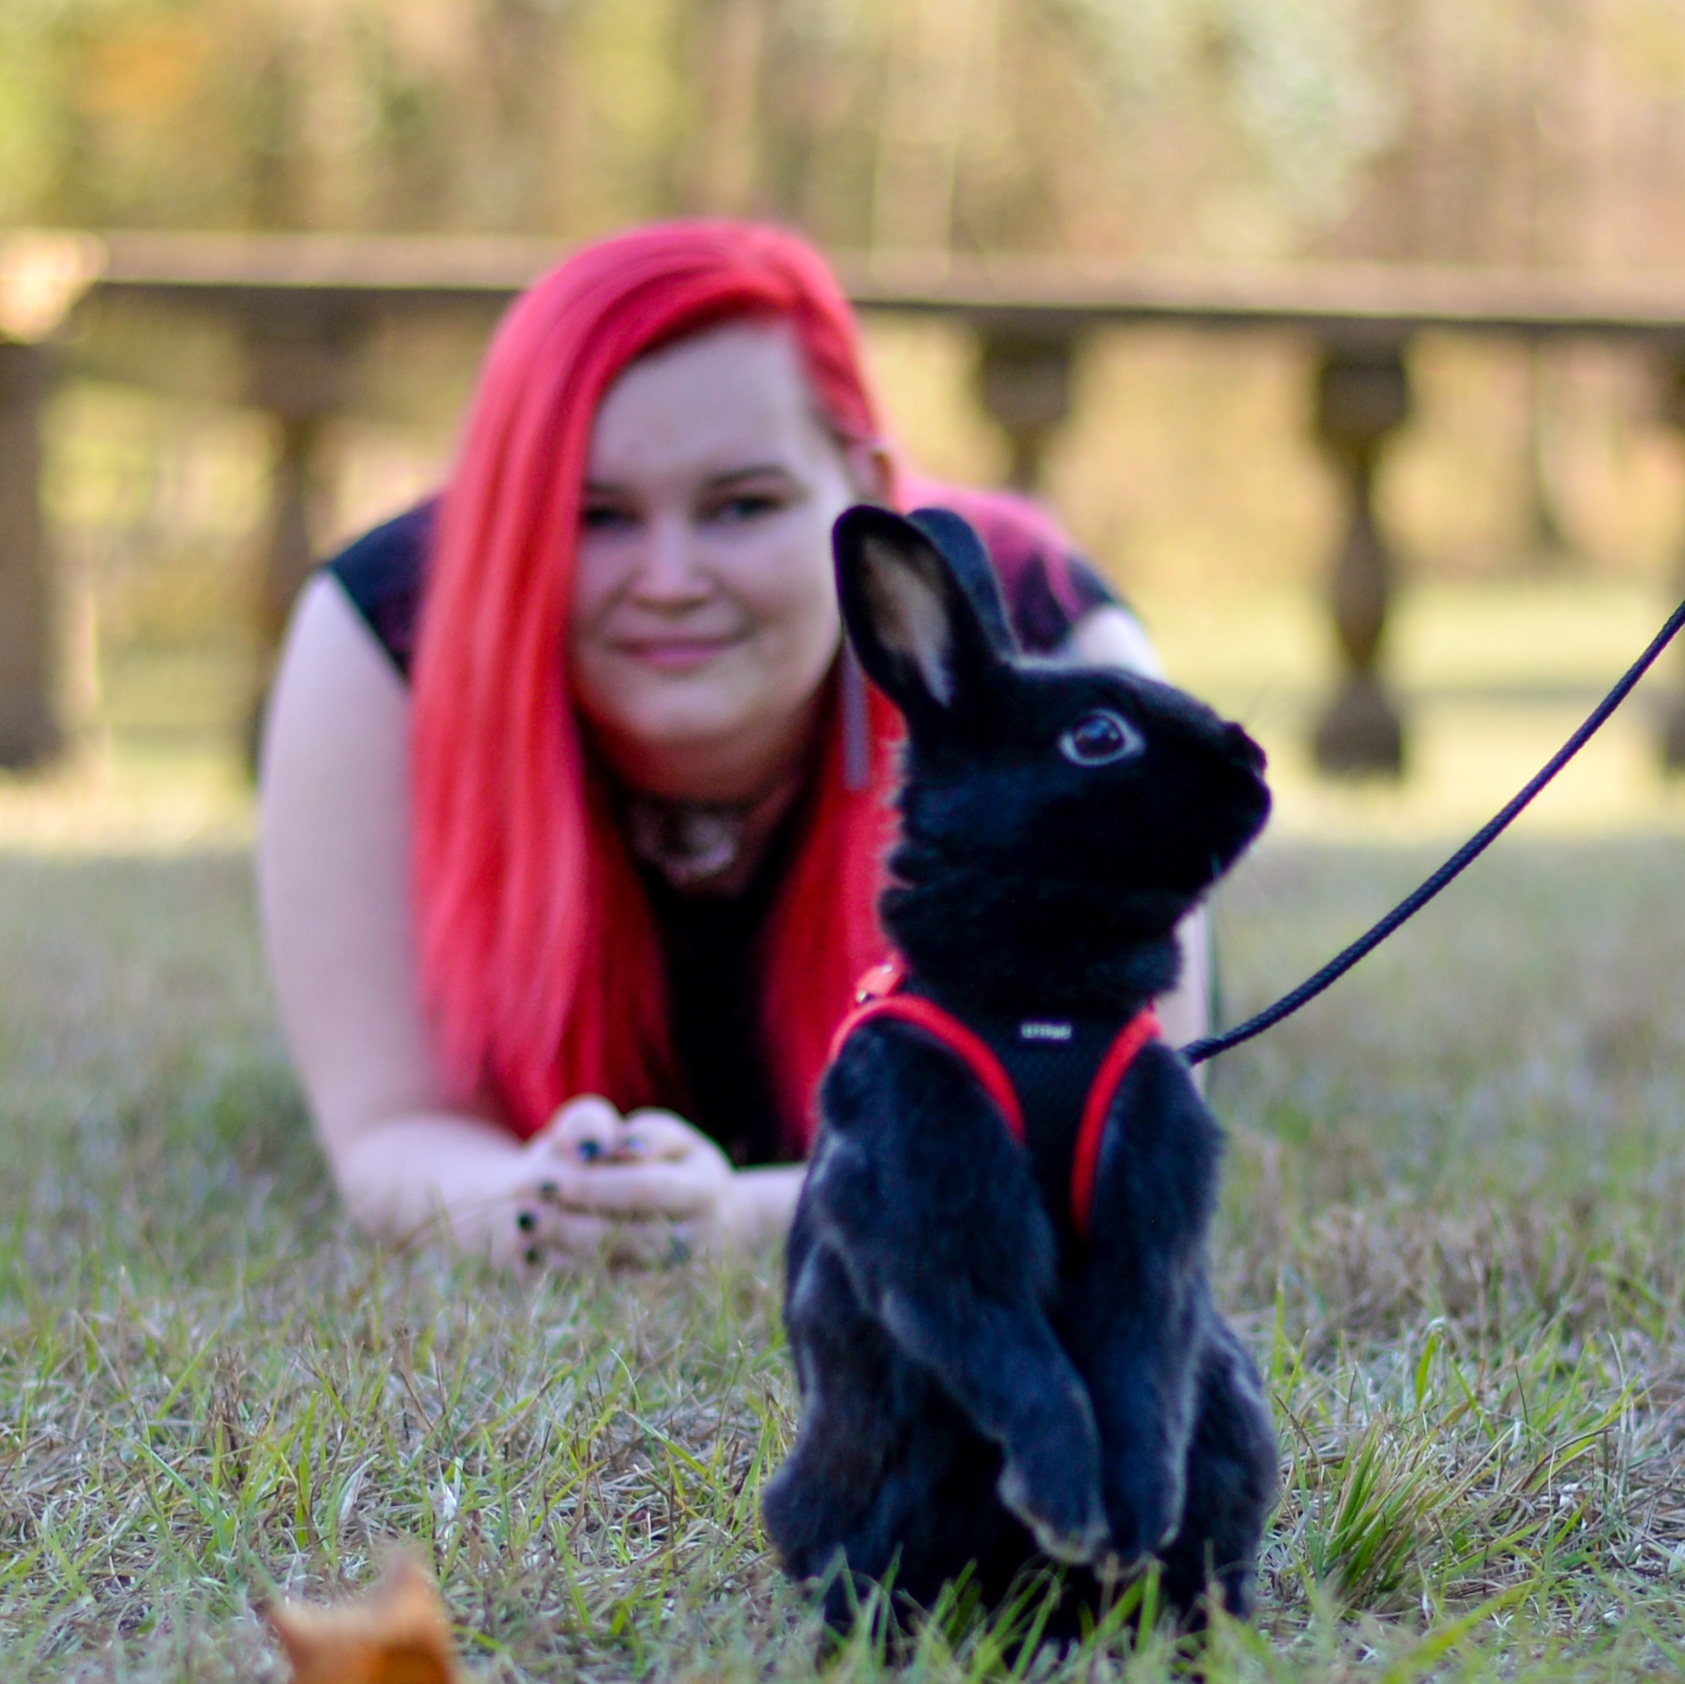 Houdini, Black Rabbit on grass in front of woman with red hair